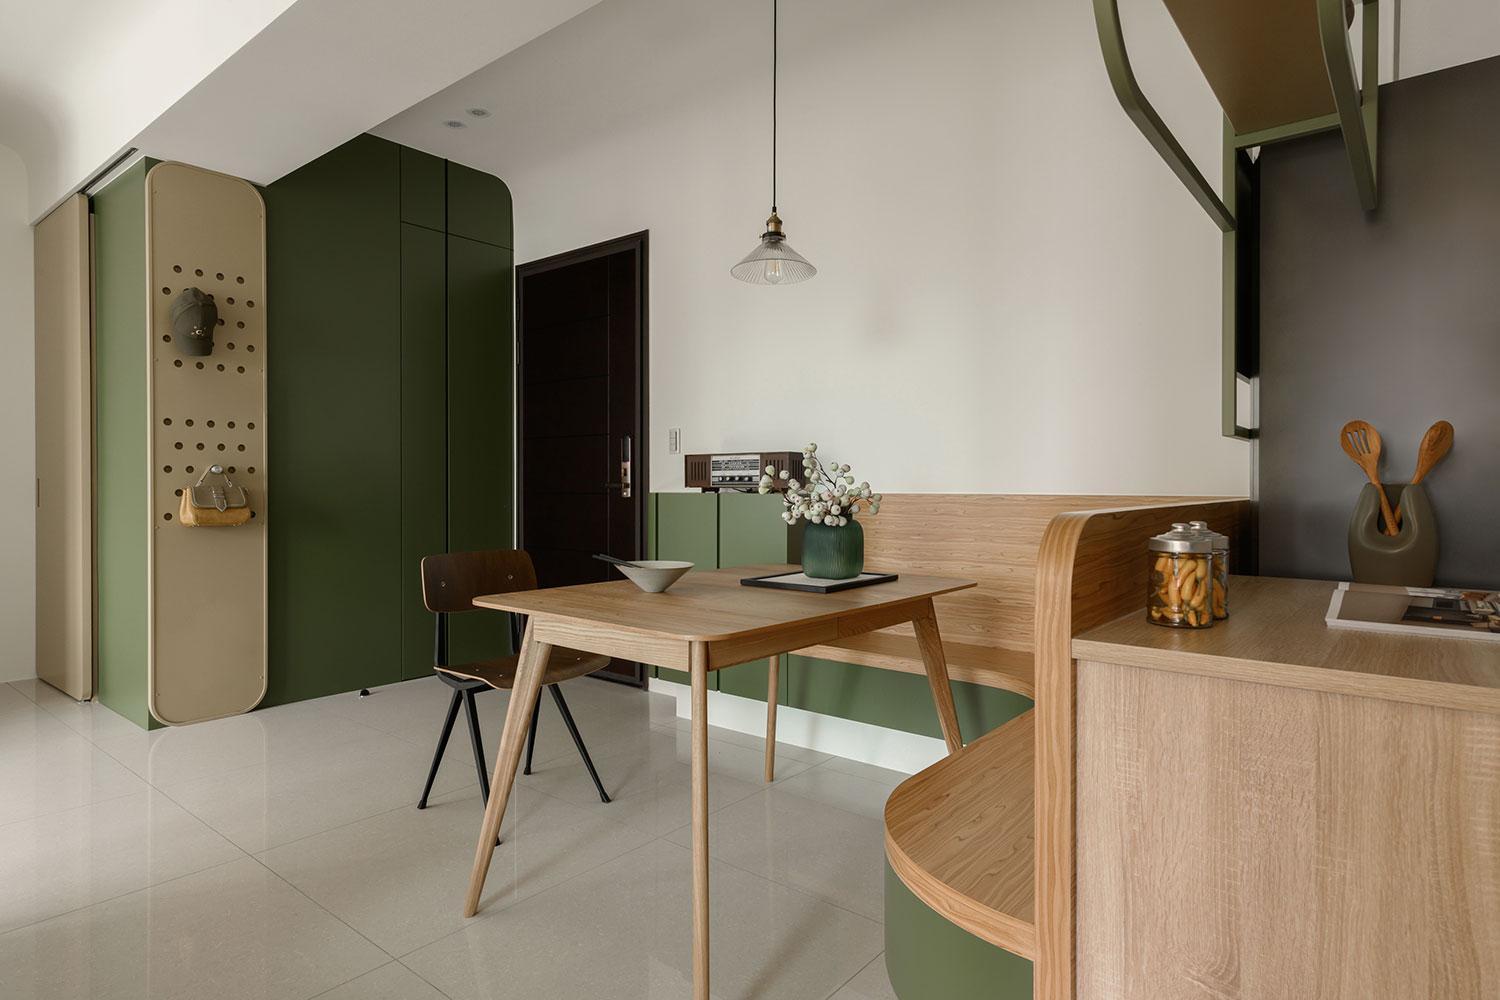 This 712sqft Flat in Taipei is Full of Warmth